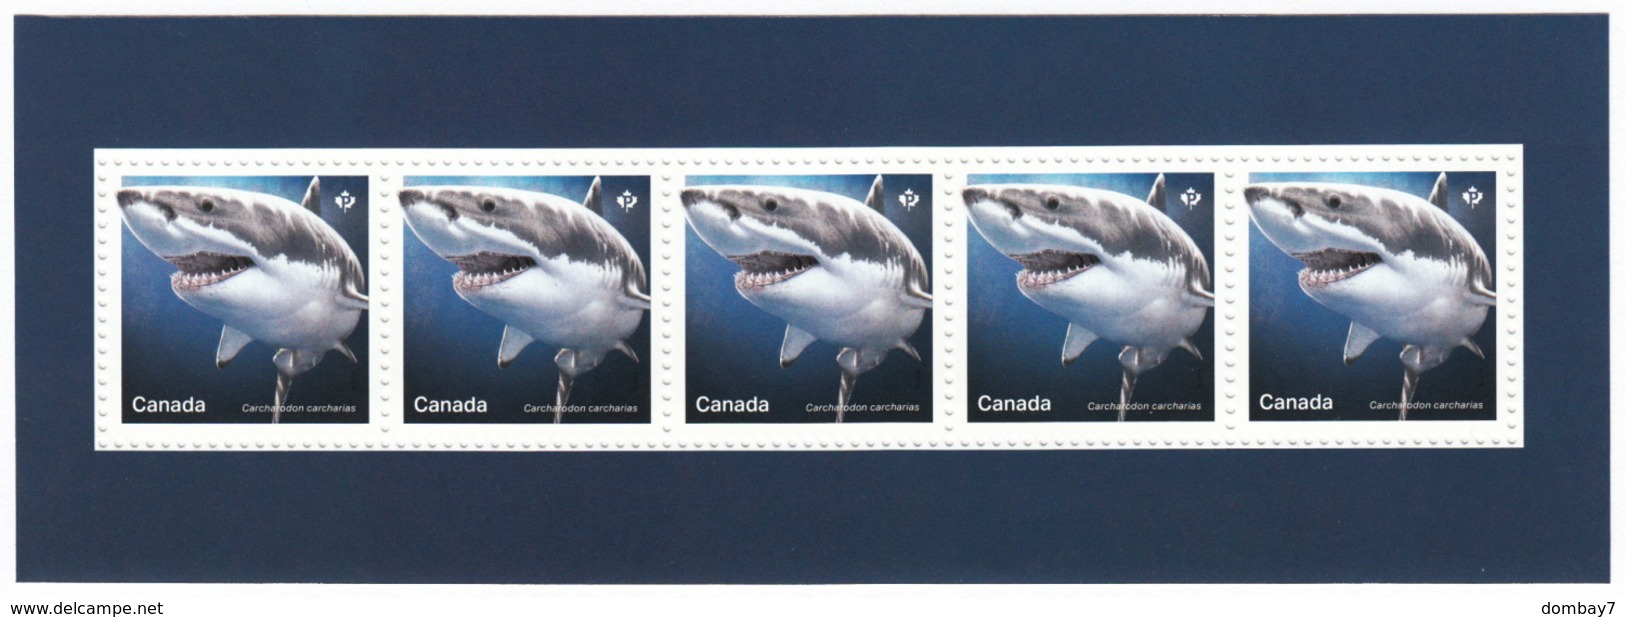 = SHARKS In Canadian Waters = HAIFISCH = REQUIN = Tiburón = SQUALO = 5 Souvenir Sheets From Uncut Sheet Canada 2018 - Maritiem Leven